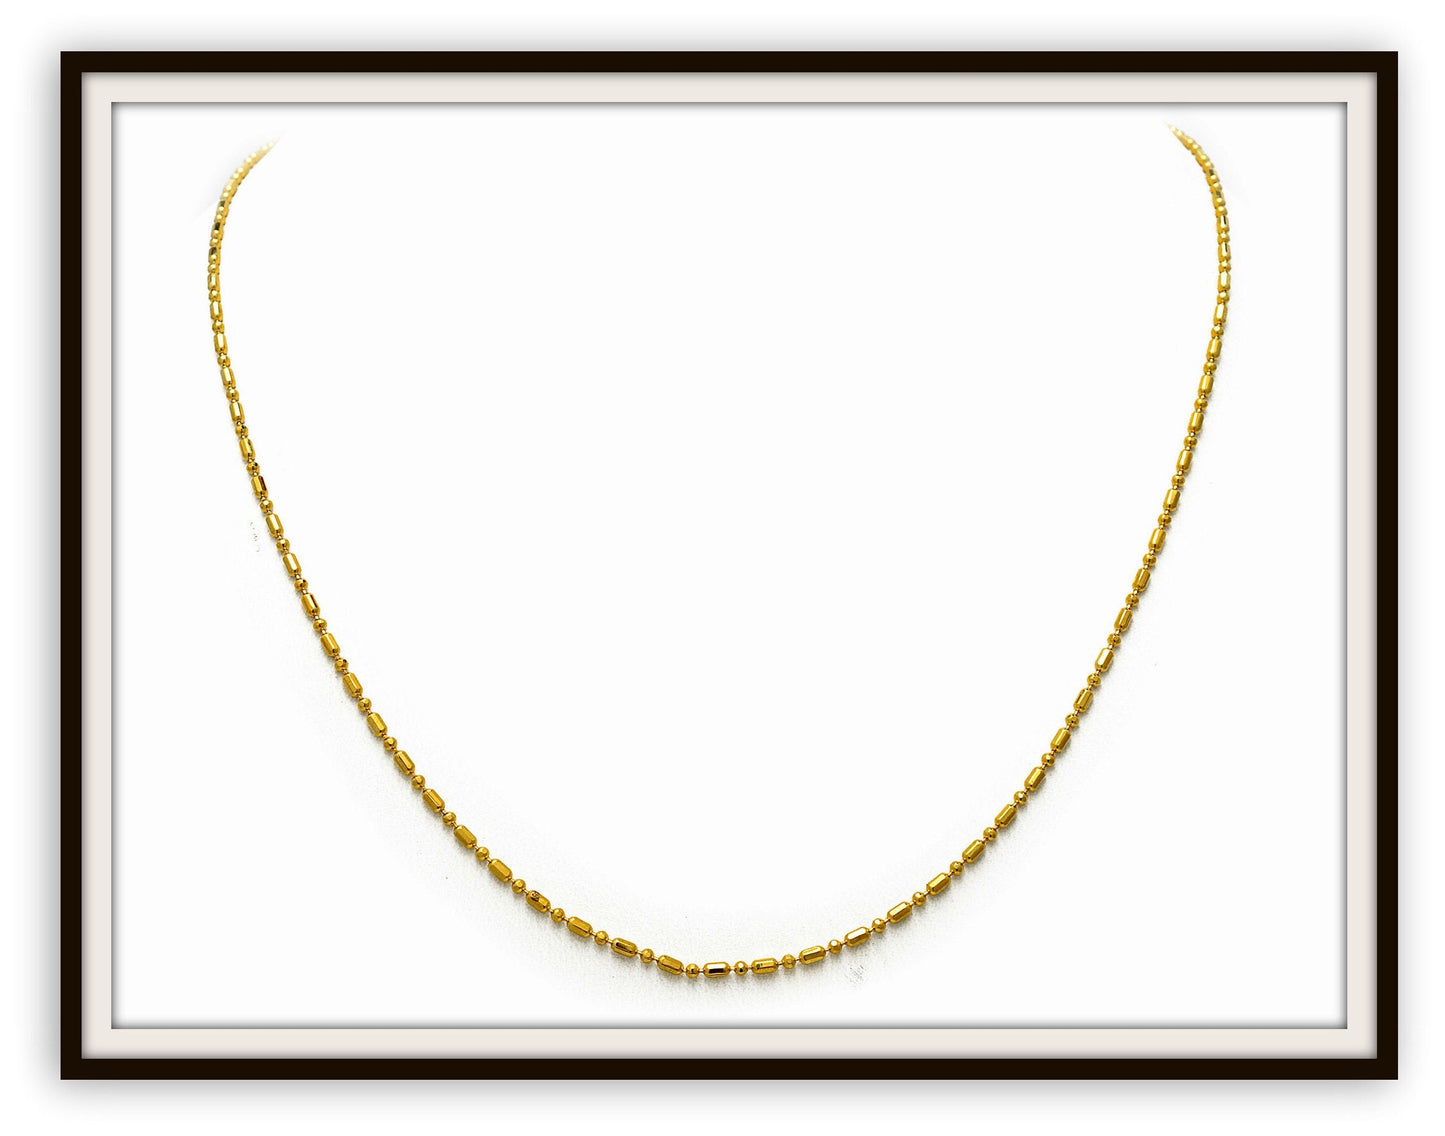 Beaded ball gold filled EP tarnish resistant chain 18kt /18" inches long/1.50mm thickness for jewelry making item #cg386-1